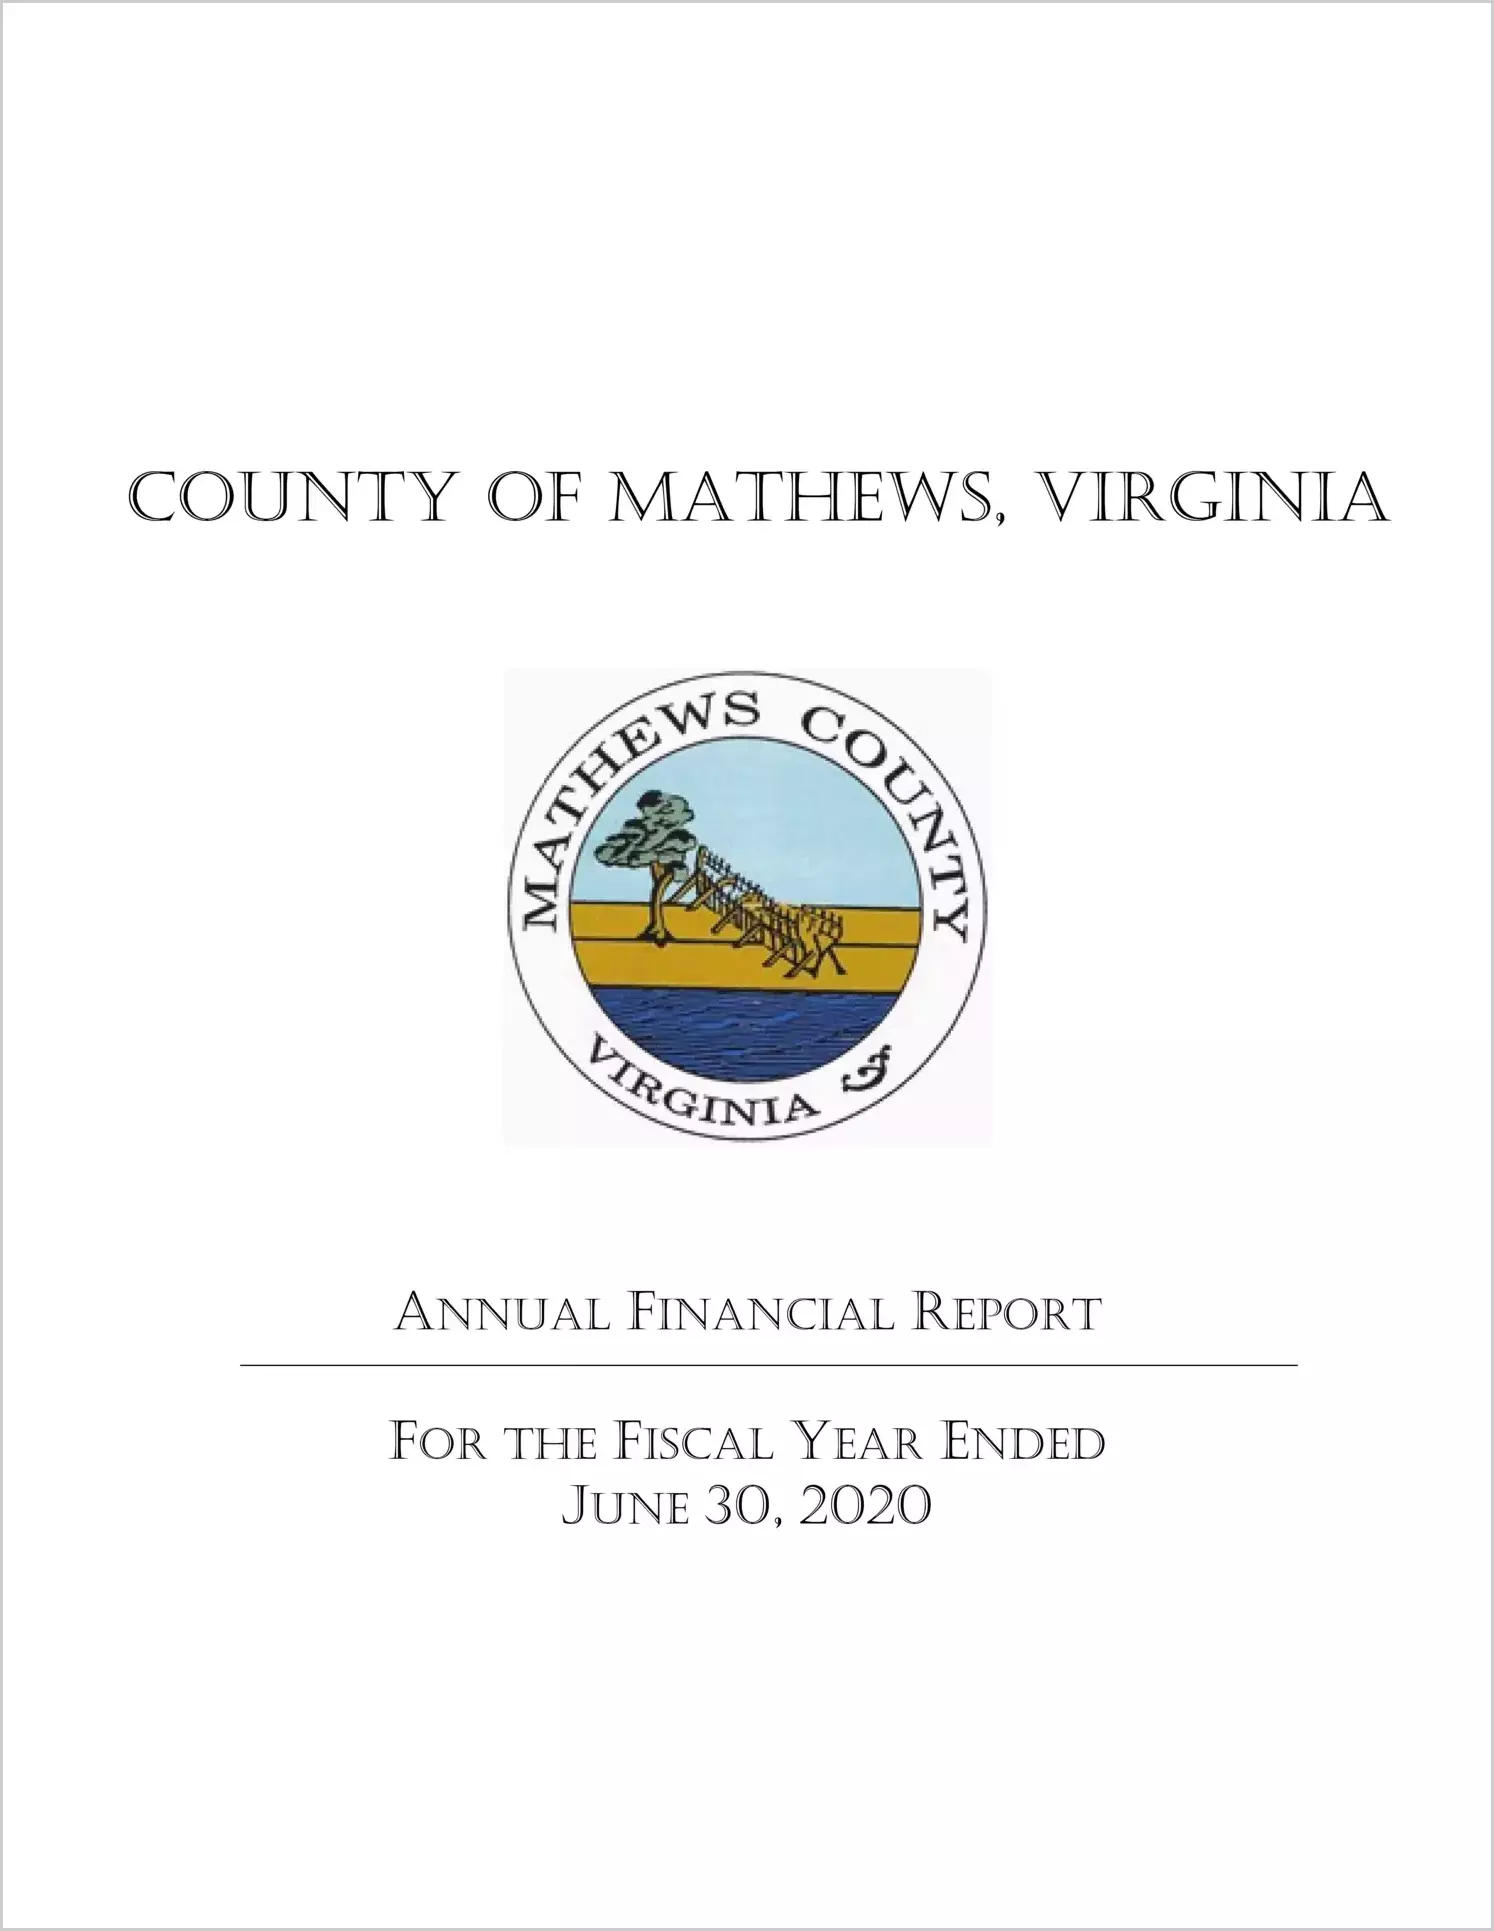 2020 Annual Financial Report for County of Mathews